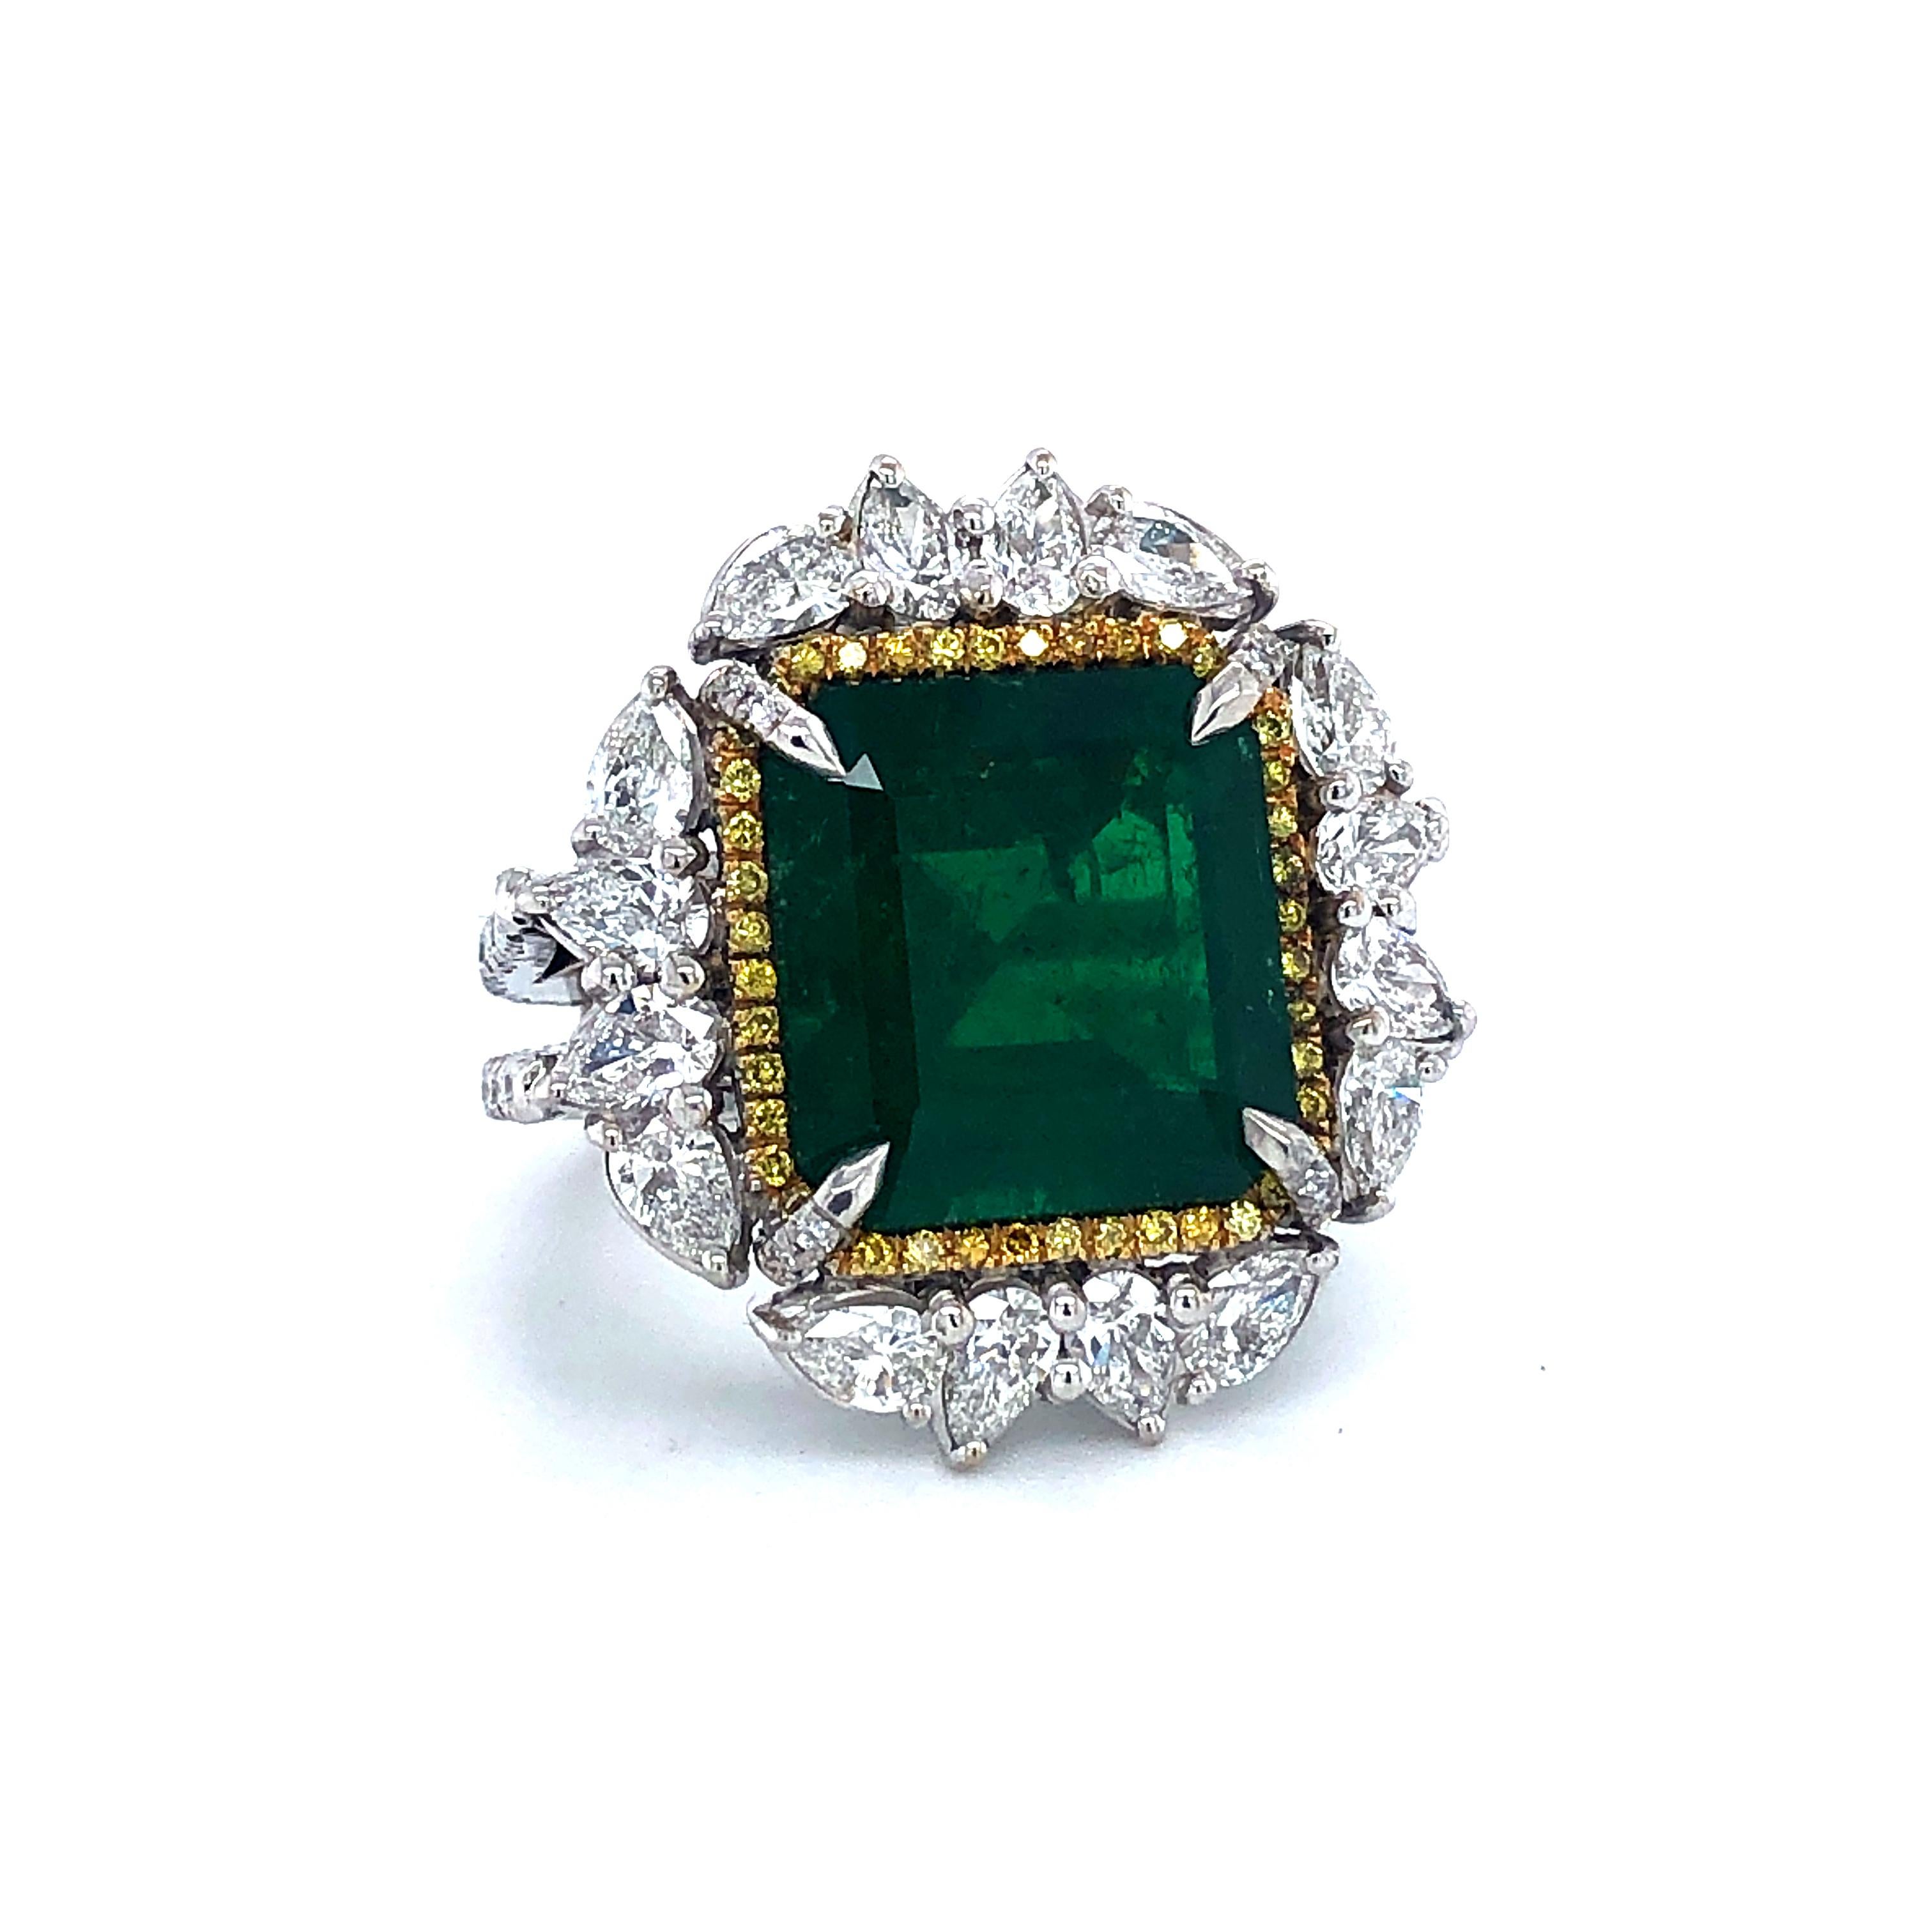 Emerald Cut 18kt white gold 11.46c Colombian Emerald Minor, 3.68c Diam, Ring Gubelin Cer For Sale